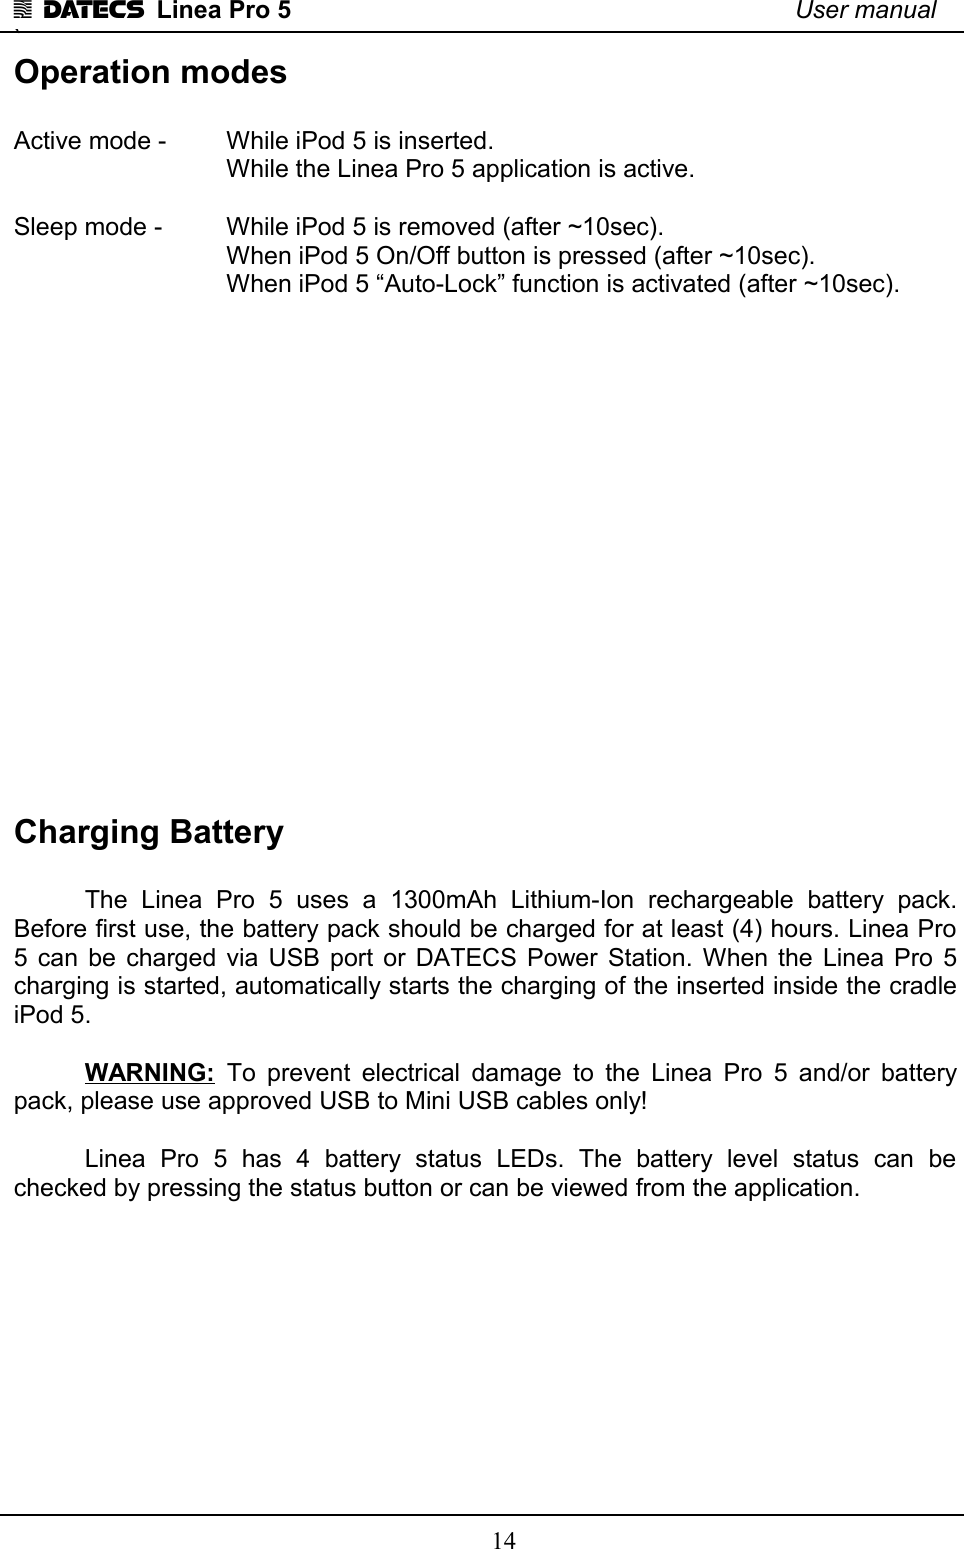 1 DATECS  Linea Pro 5 User manual`Operation modesActive mode -  While iPod 5 is inserted. While the Linea Pro 5 application is active. Sleep mode -  While iPod 5 is removed (after ~10sec).When iPod 5 On/Off button is pressed (after ~10sec).When iPod 5 “Auto-Lock” function is activated (after ~10sec).Charging BatteryThe   Linea   Pro   5   uses   a   1300mAh   Lithium-Ion   rechargeable   battery   pack. Before first use, the battery pack should be charged for at least (4) hours. Linea Pro 5 can be charged via USB port or DATECS Power Station. When the Linea Pro 5 charging is started, automatically starts the charging of the inserted inside the cradle iPod 5.WARNING:  To prevent electrical damage to the Linea Pro 5 and/or battery pack, please use approved USB to Mini USB cables only!Linea   Pro   5   has   4   battery   status   LEDs.   The   battery   level   status   can   be checked by pressing the status button or can be viewed from the application.14